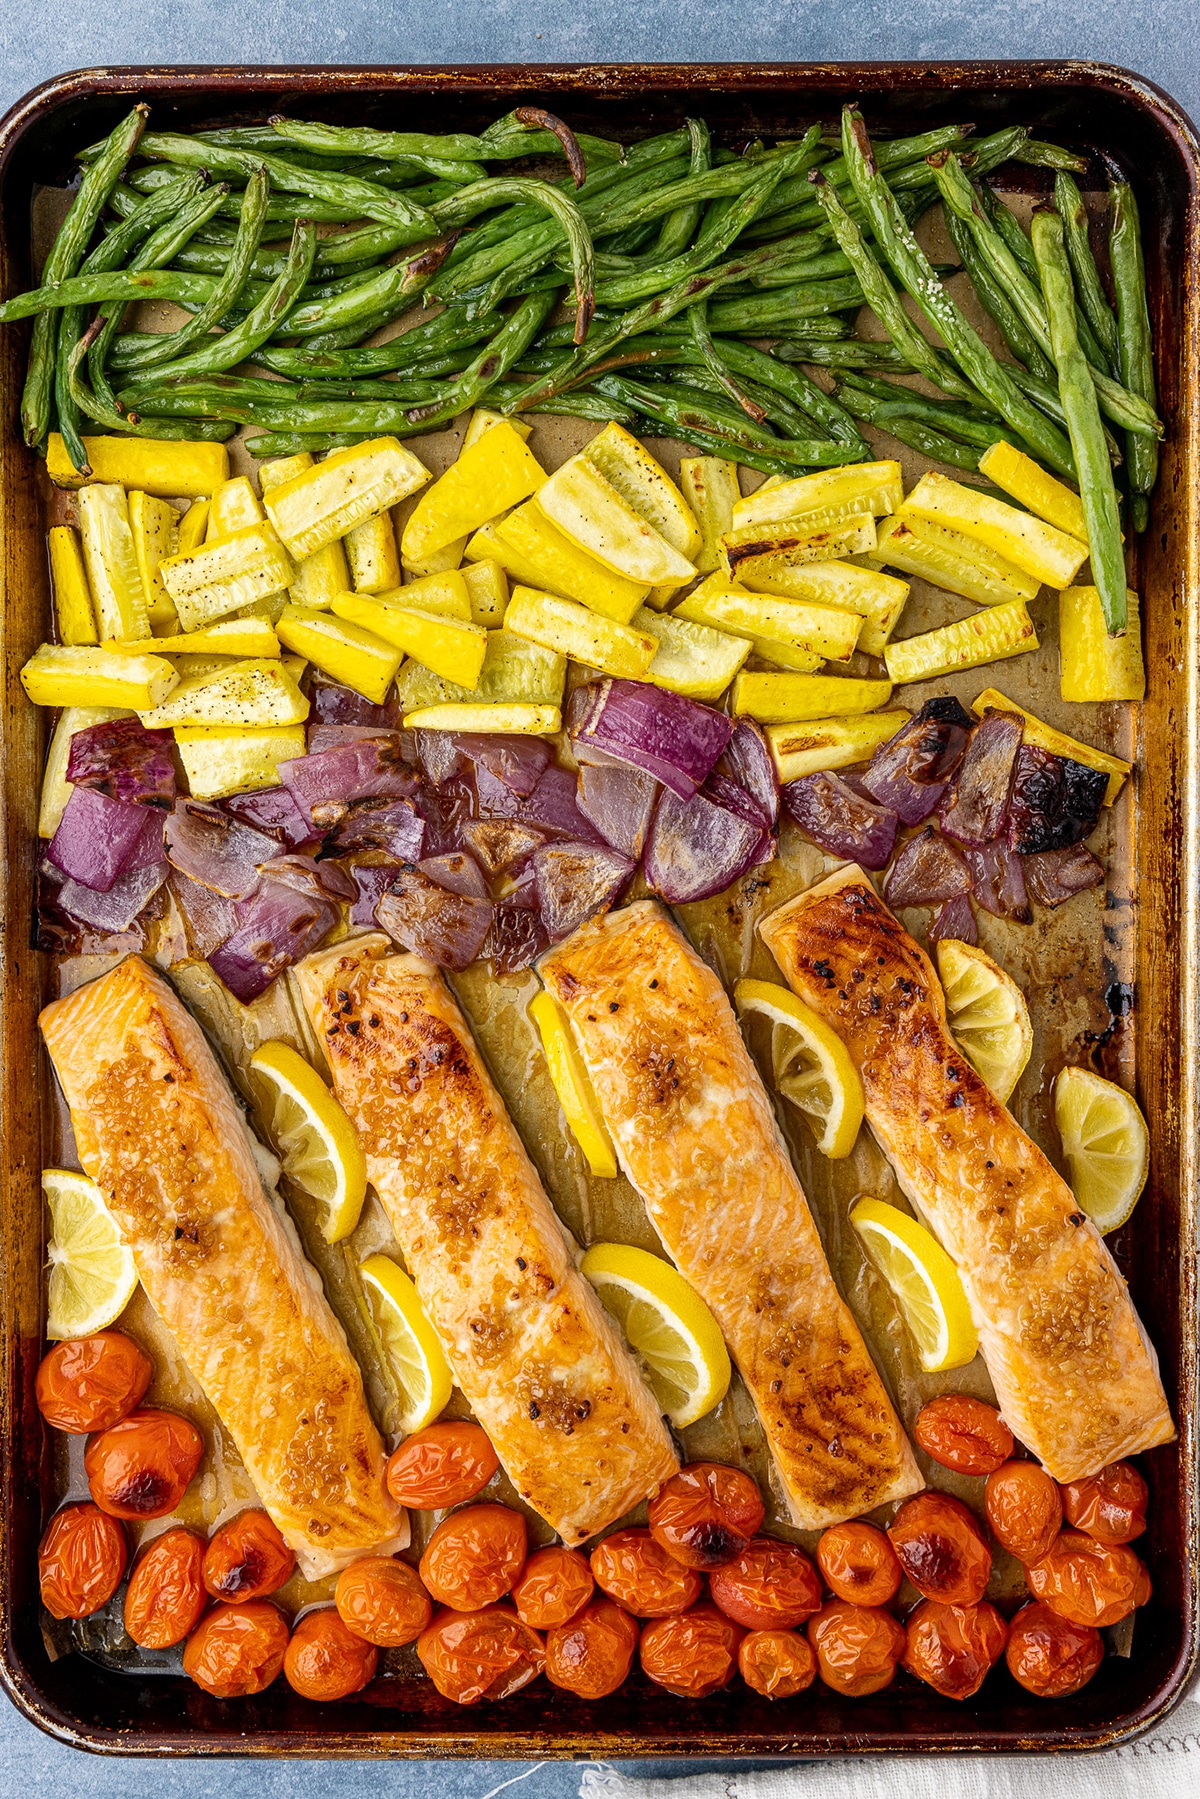 Sheet pan with a row of green beans, yellow squash, red onions, salmon filets, and cherry tomatoes.